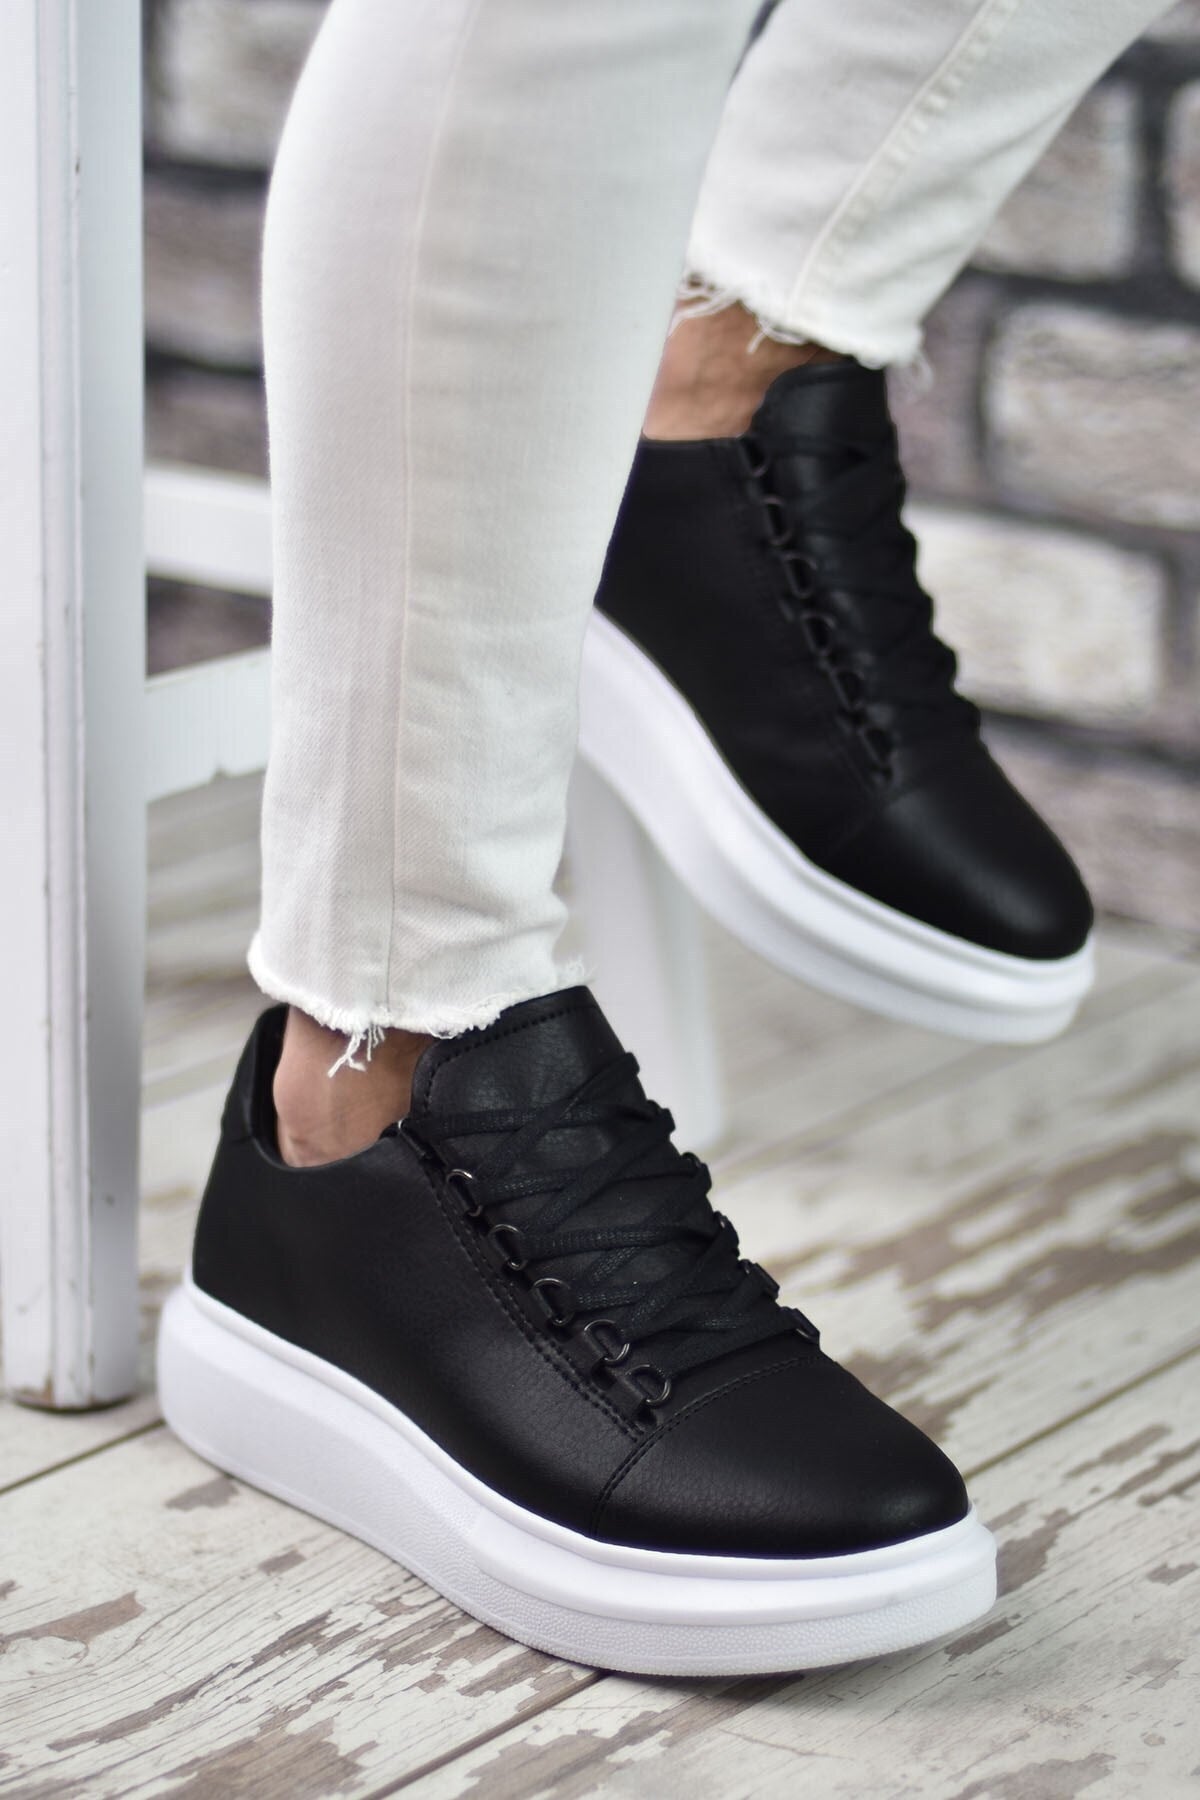 Black and white male sneaker